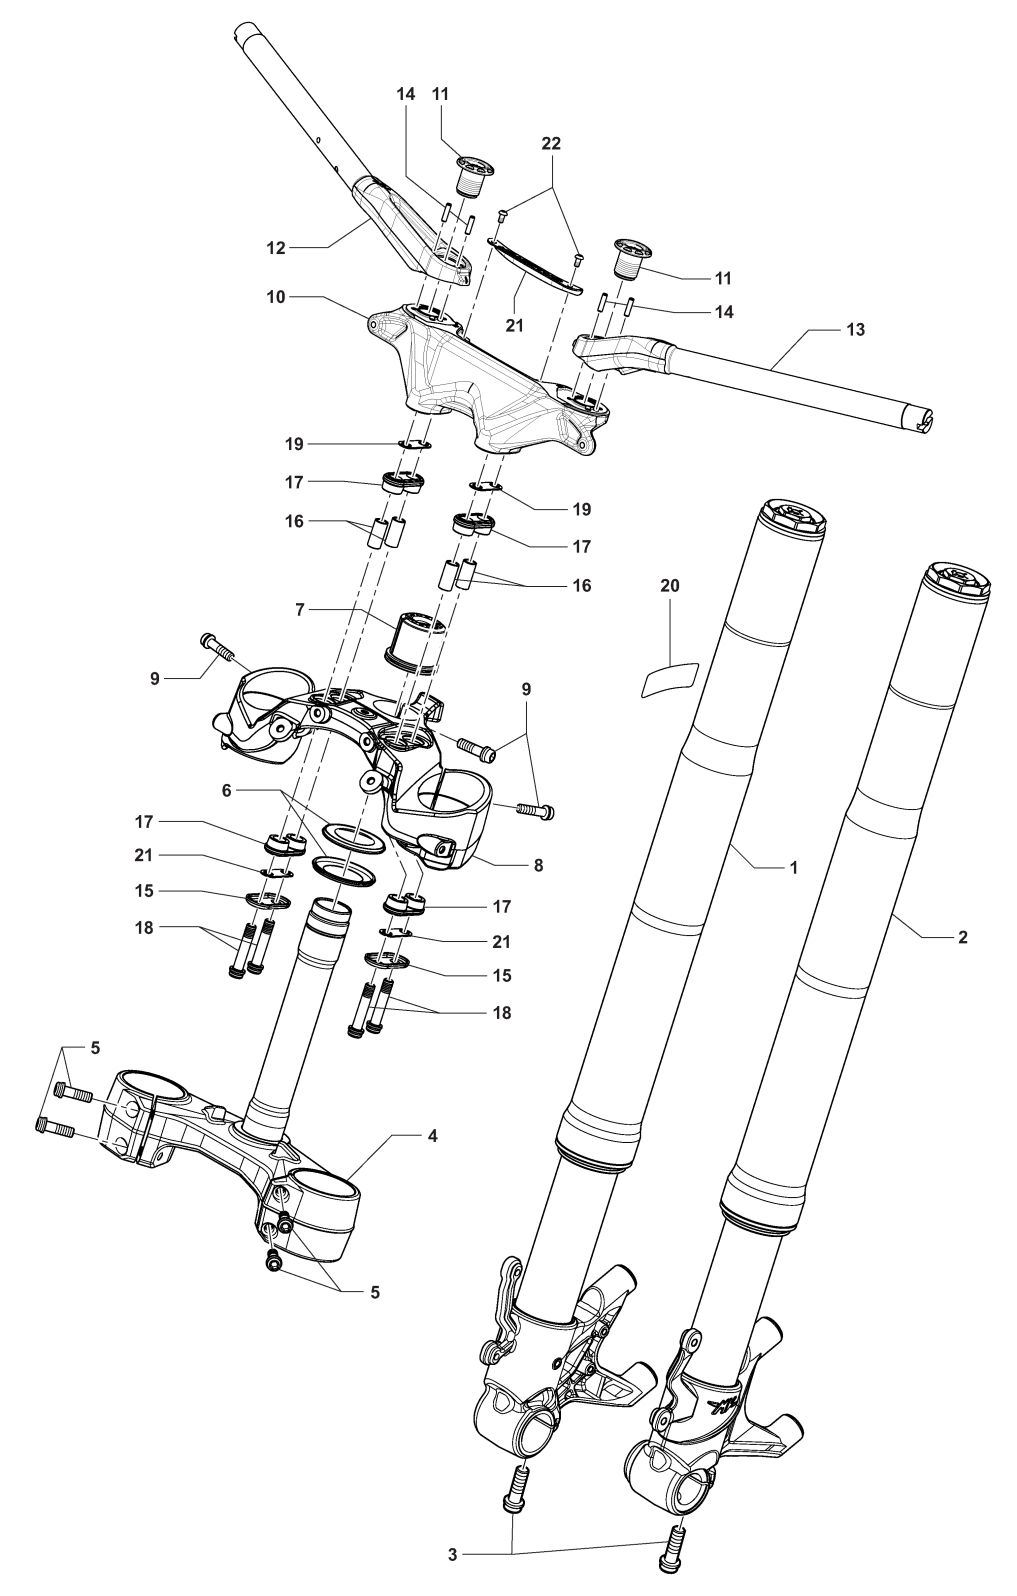 Front Suspension Assembly


